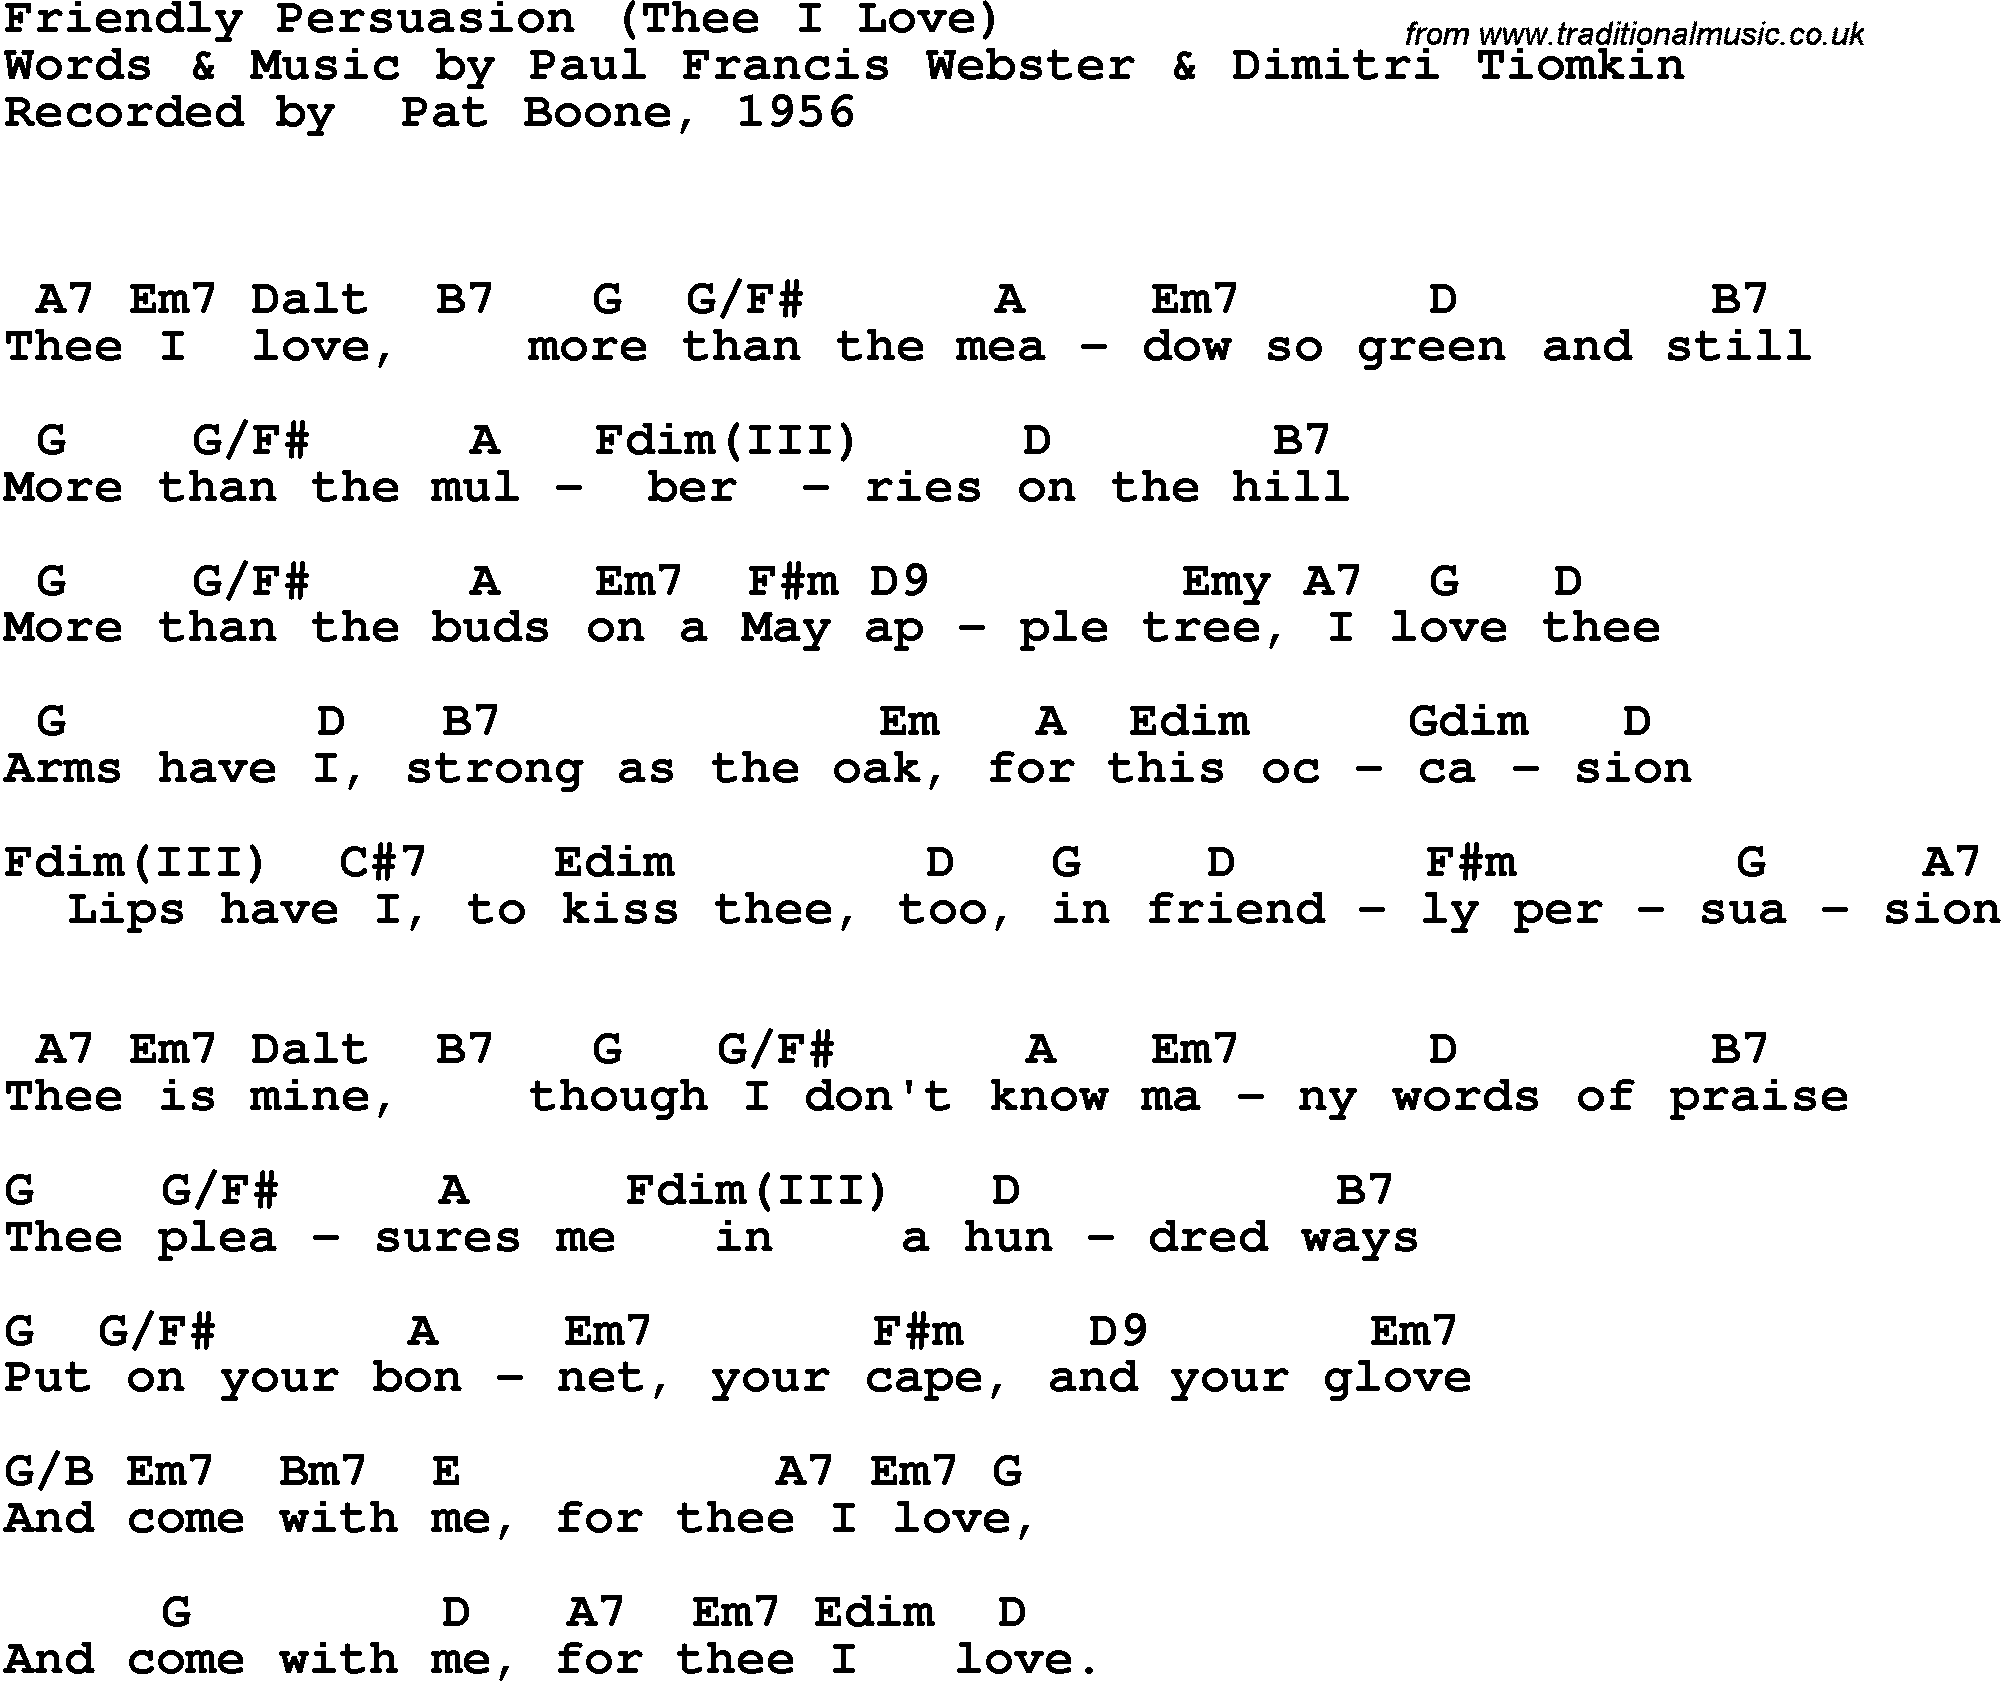 Song Lyrics with guitar chords for Friendly Persuasaion - Pat Boone, 1956